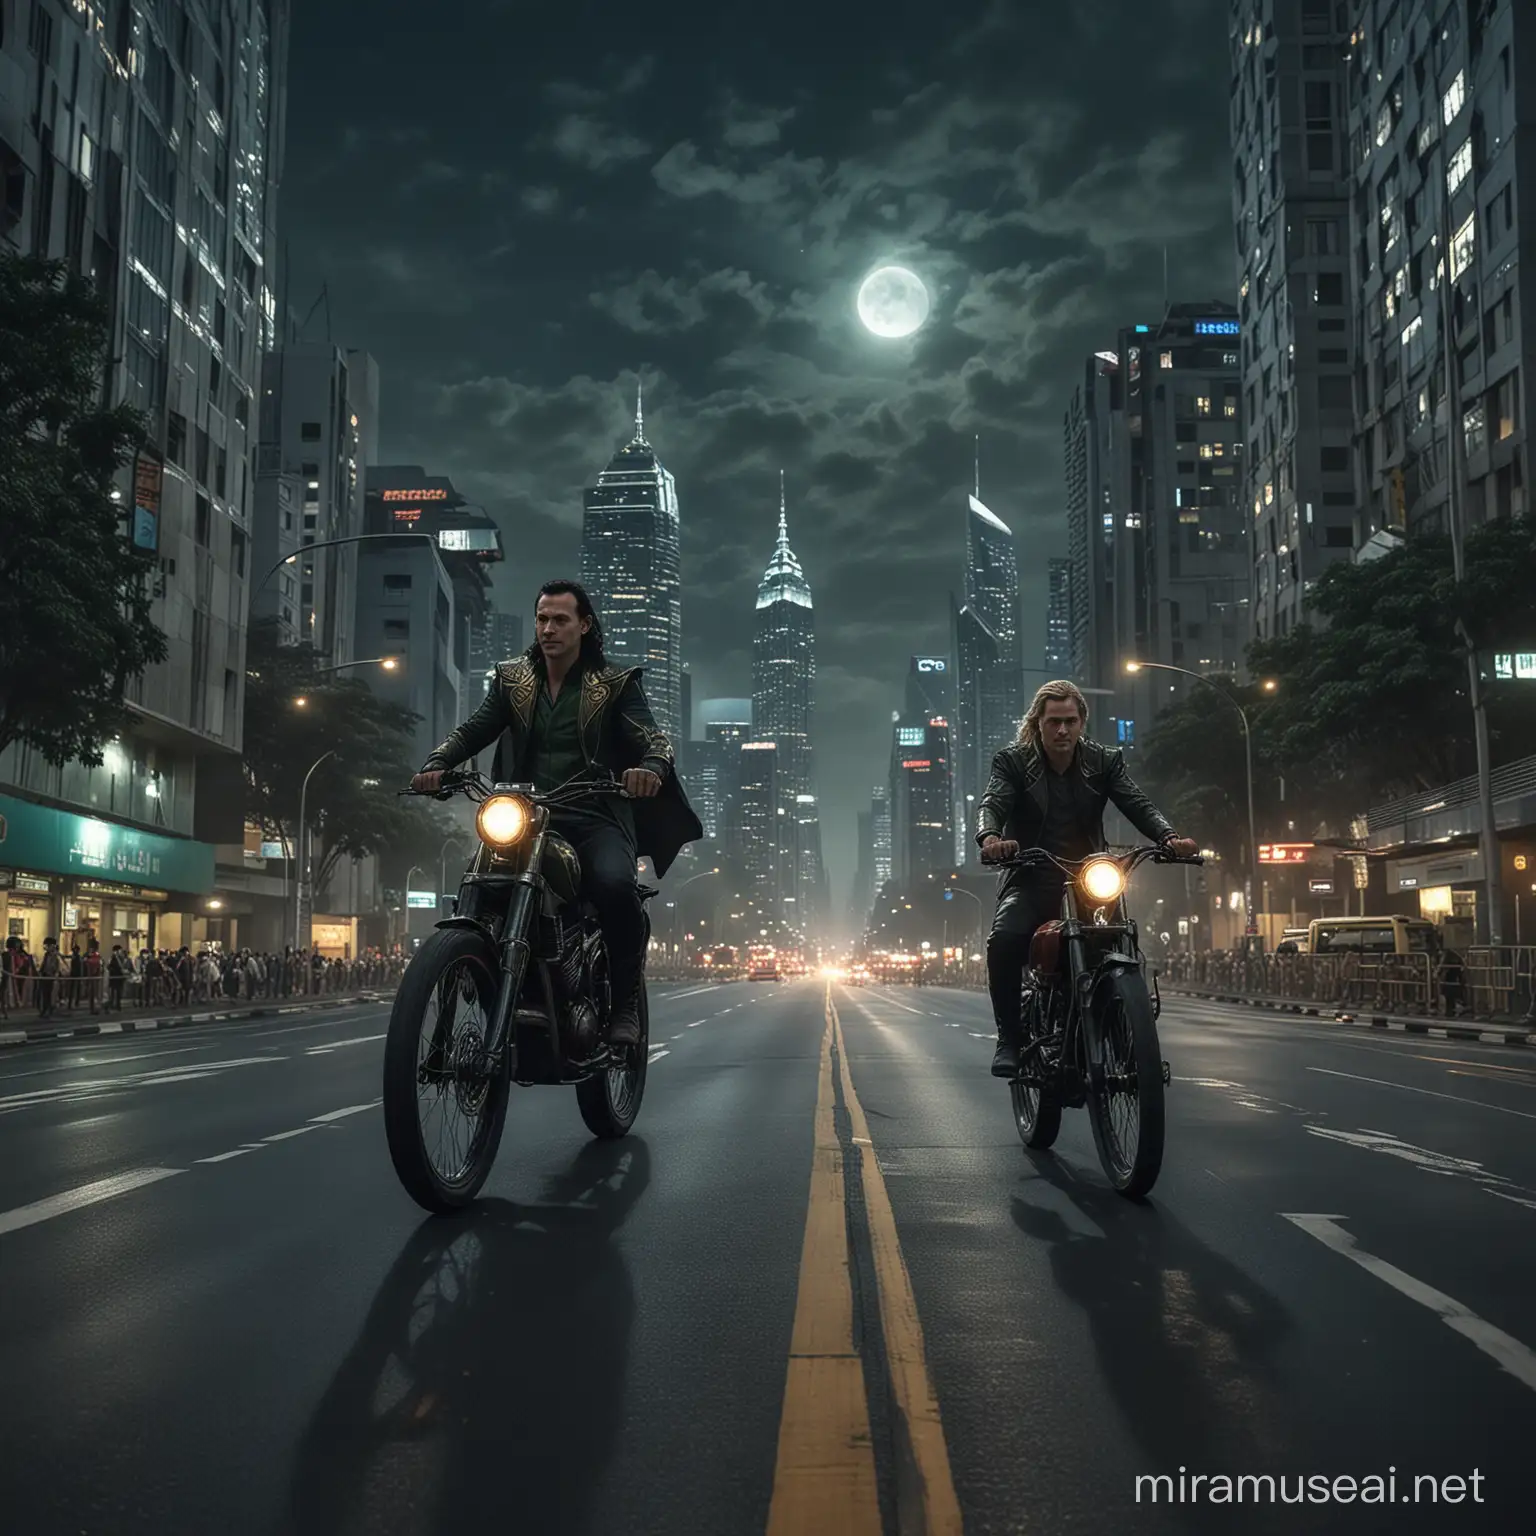 give me a realistic image of loki laufeyson and thor odinson from marvel cinematic universe, in this picture they are ride a bike in jakarta road in the night. they ride a bike with tall building around them and there is a crescent moont behind them. there is a busway transjakarta on the road and also mrt. they are enjoy the view of jakarta 